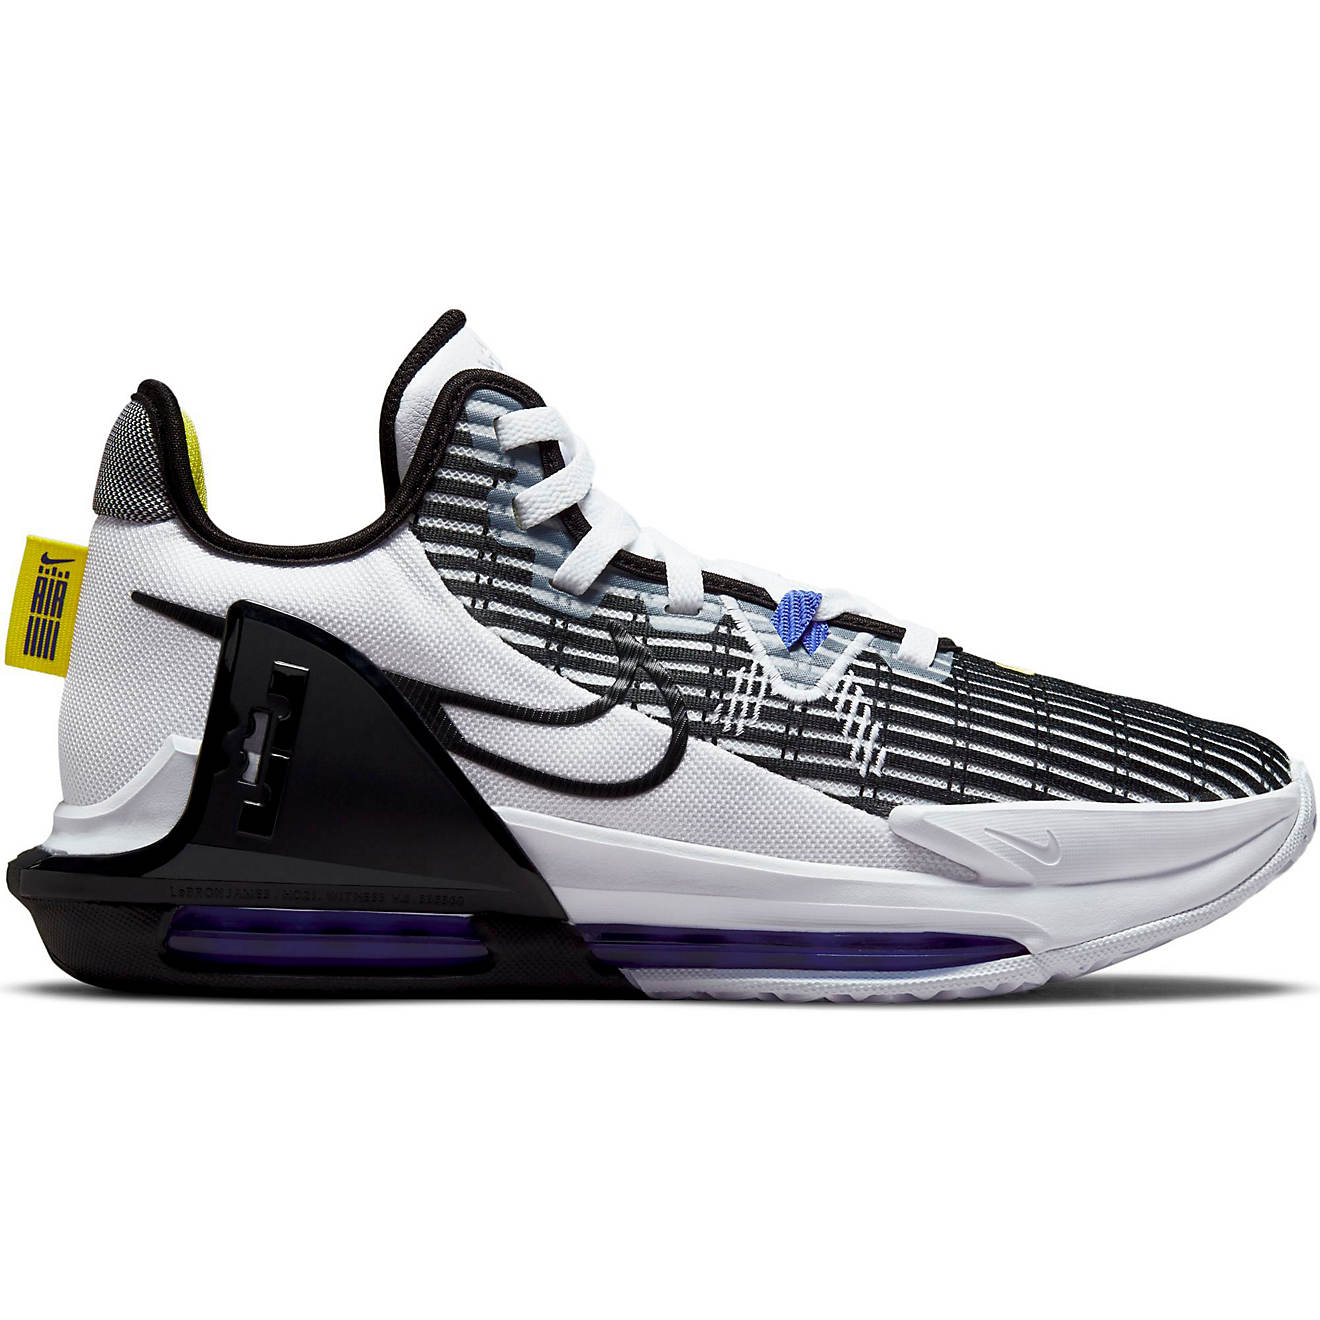 Nike Adults' LeBron Witness VI Basketball Shoes on Sale At Academy Sports + Outdoors